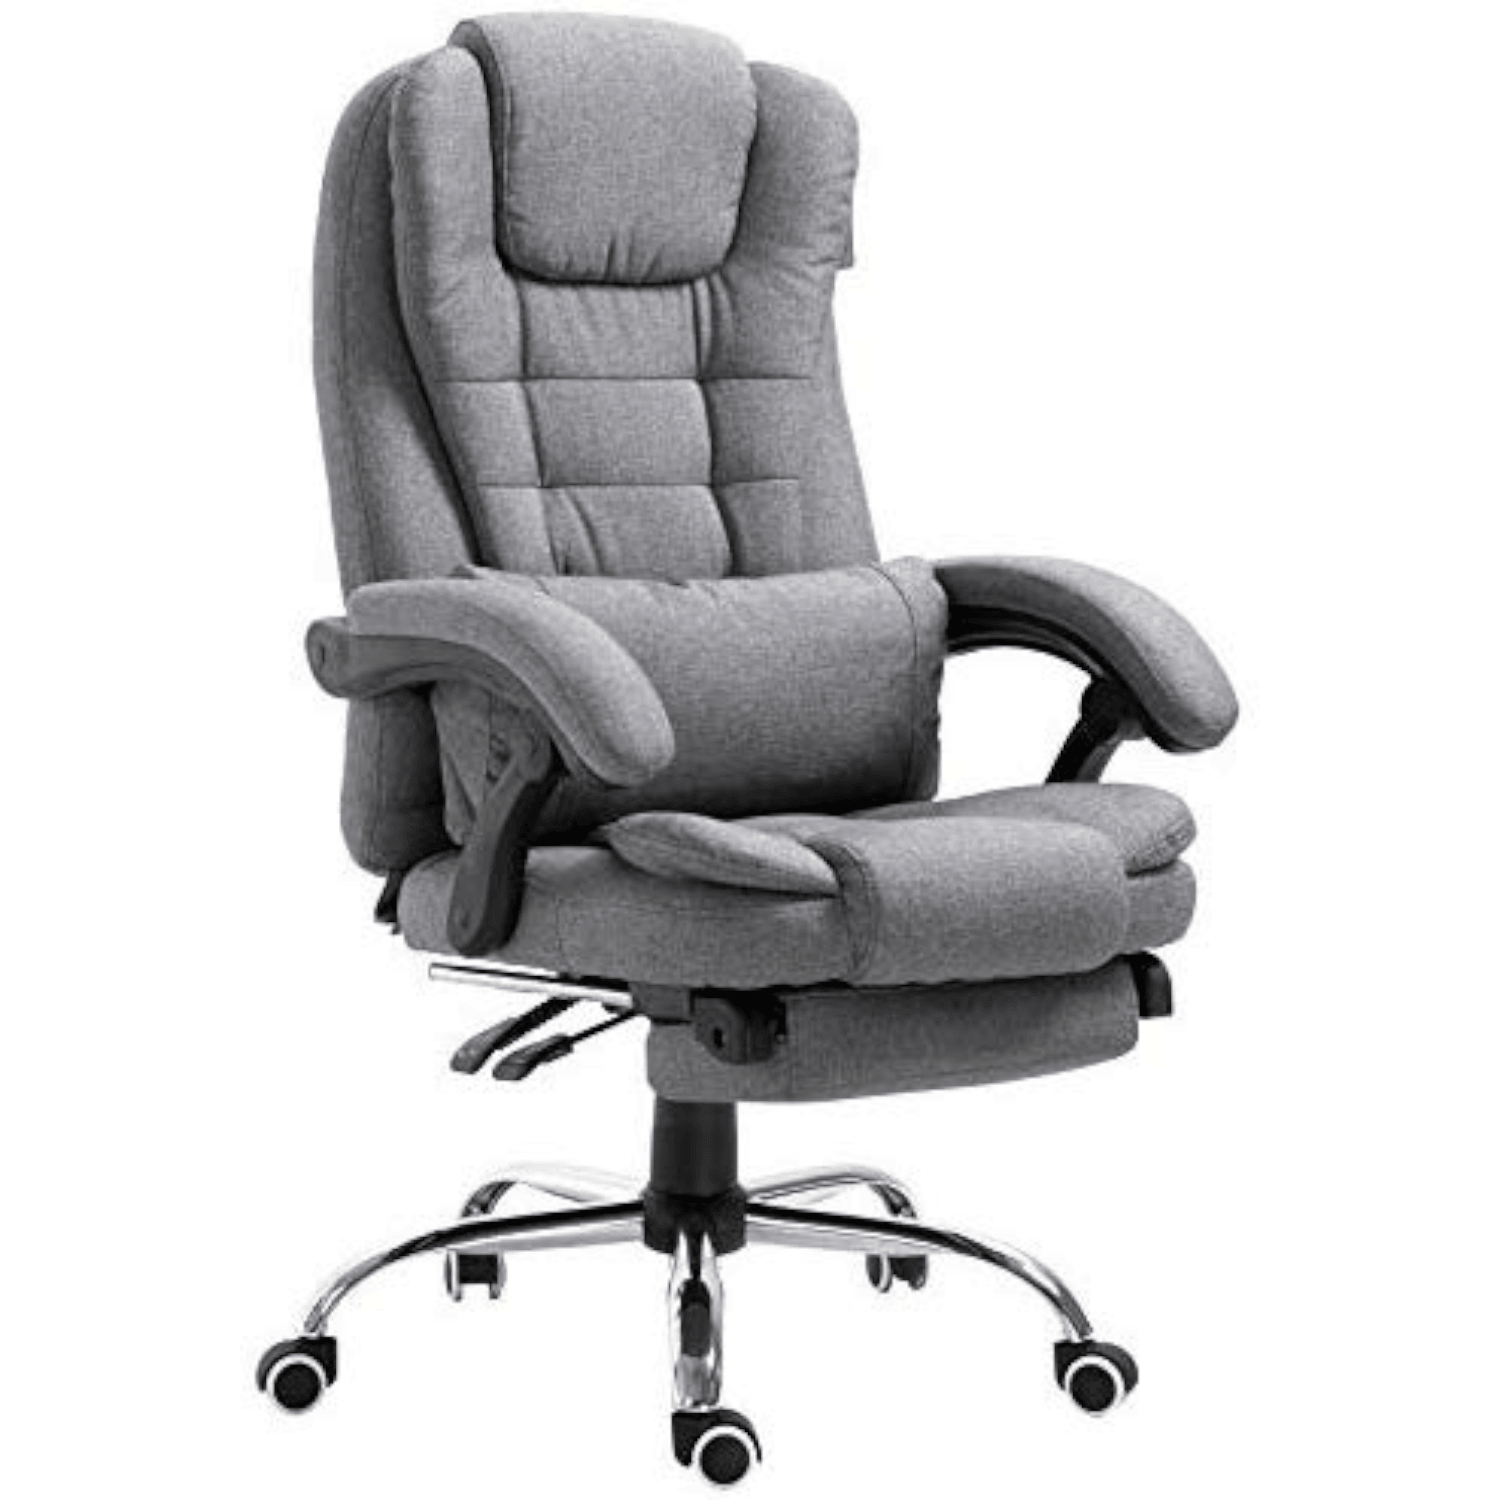 Executive Reclining Computer Desk Chair with Footrest ...